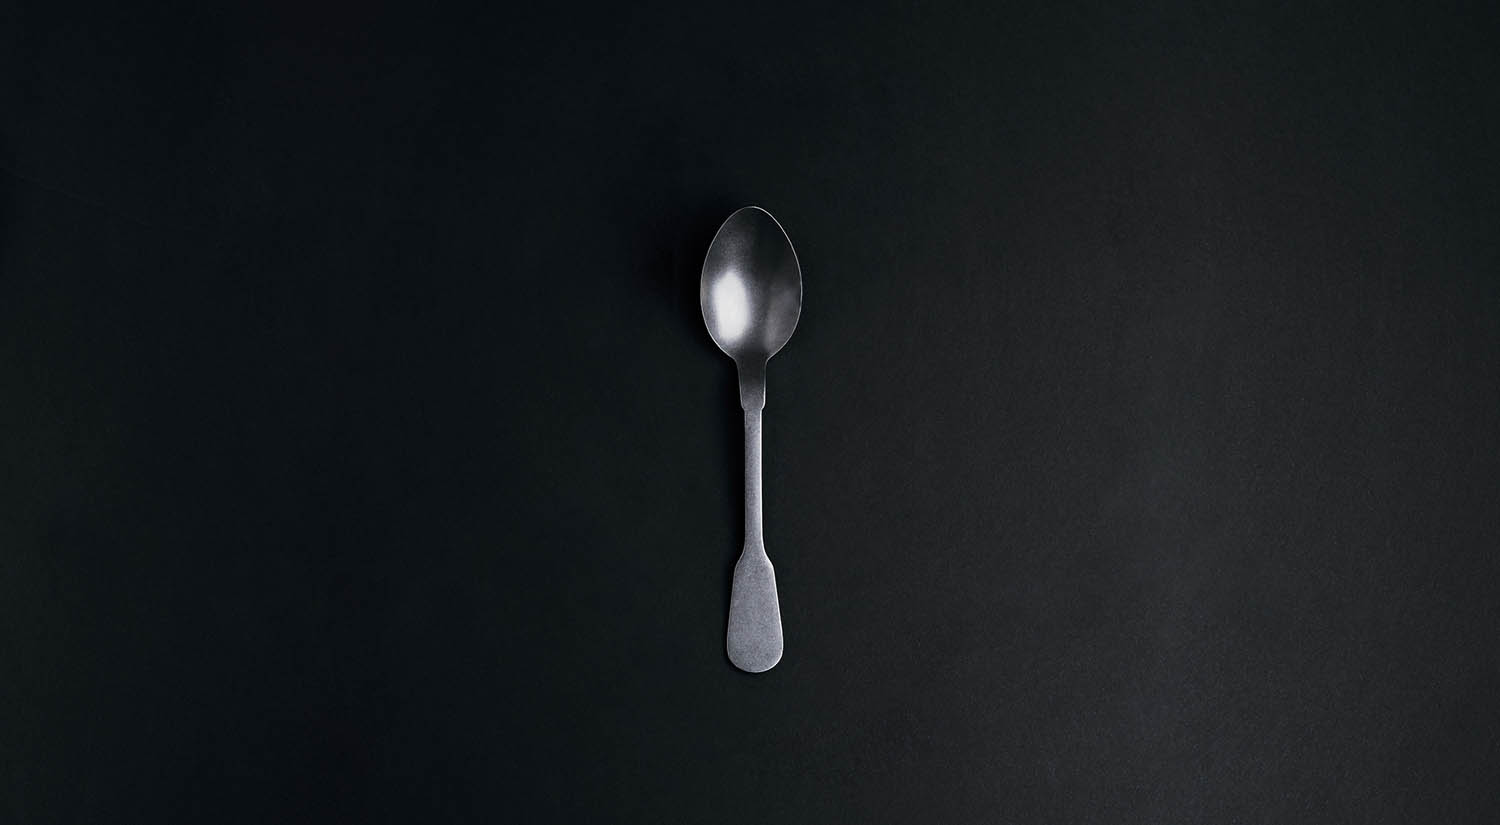 Raul Angel's photo depicts a single silver spoon resting on a black background. Sppons can represent units of energy for people with chronic illness. For that reason, chronically ill people often call themselves spoonies.